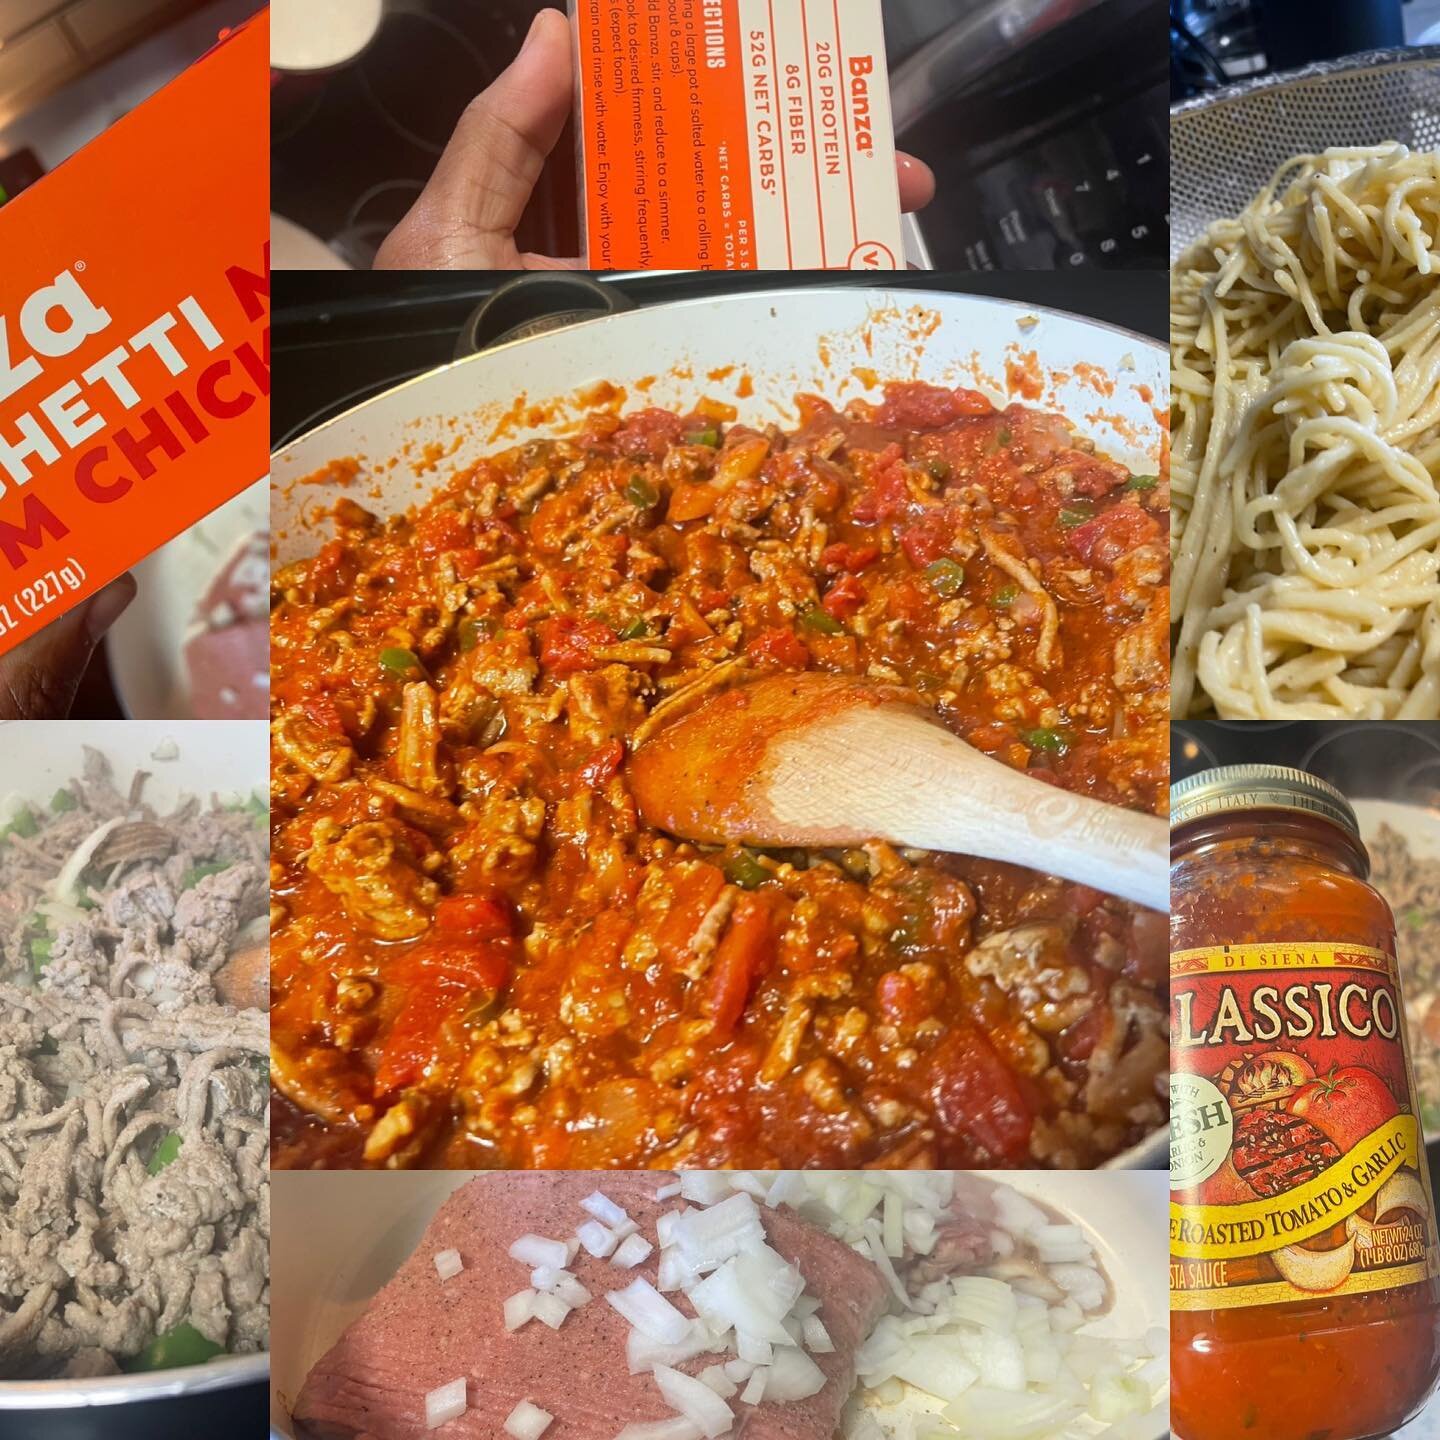 Ground Turkey Spaghetti🔥🍝🔥

The pasta was made with Garbanzo Bean which provides more protein and fiber per serving than enriched pasta. 

Lean ground Turkey is a healthier alternative to ground beef with less fat per serving with just as much pro